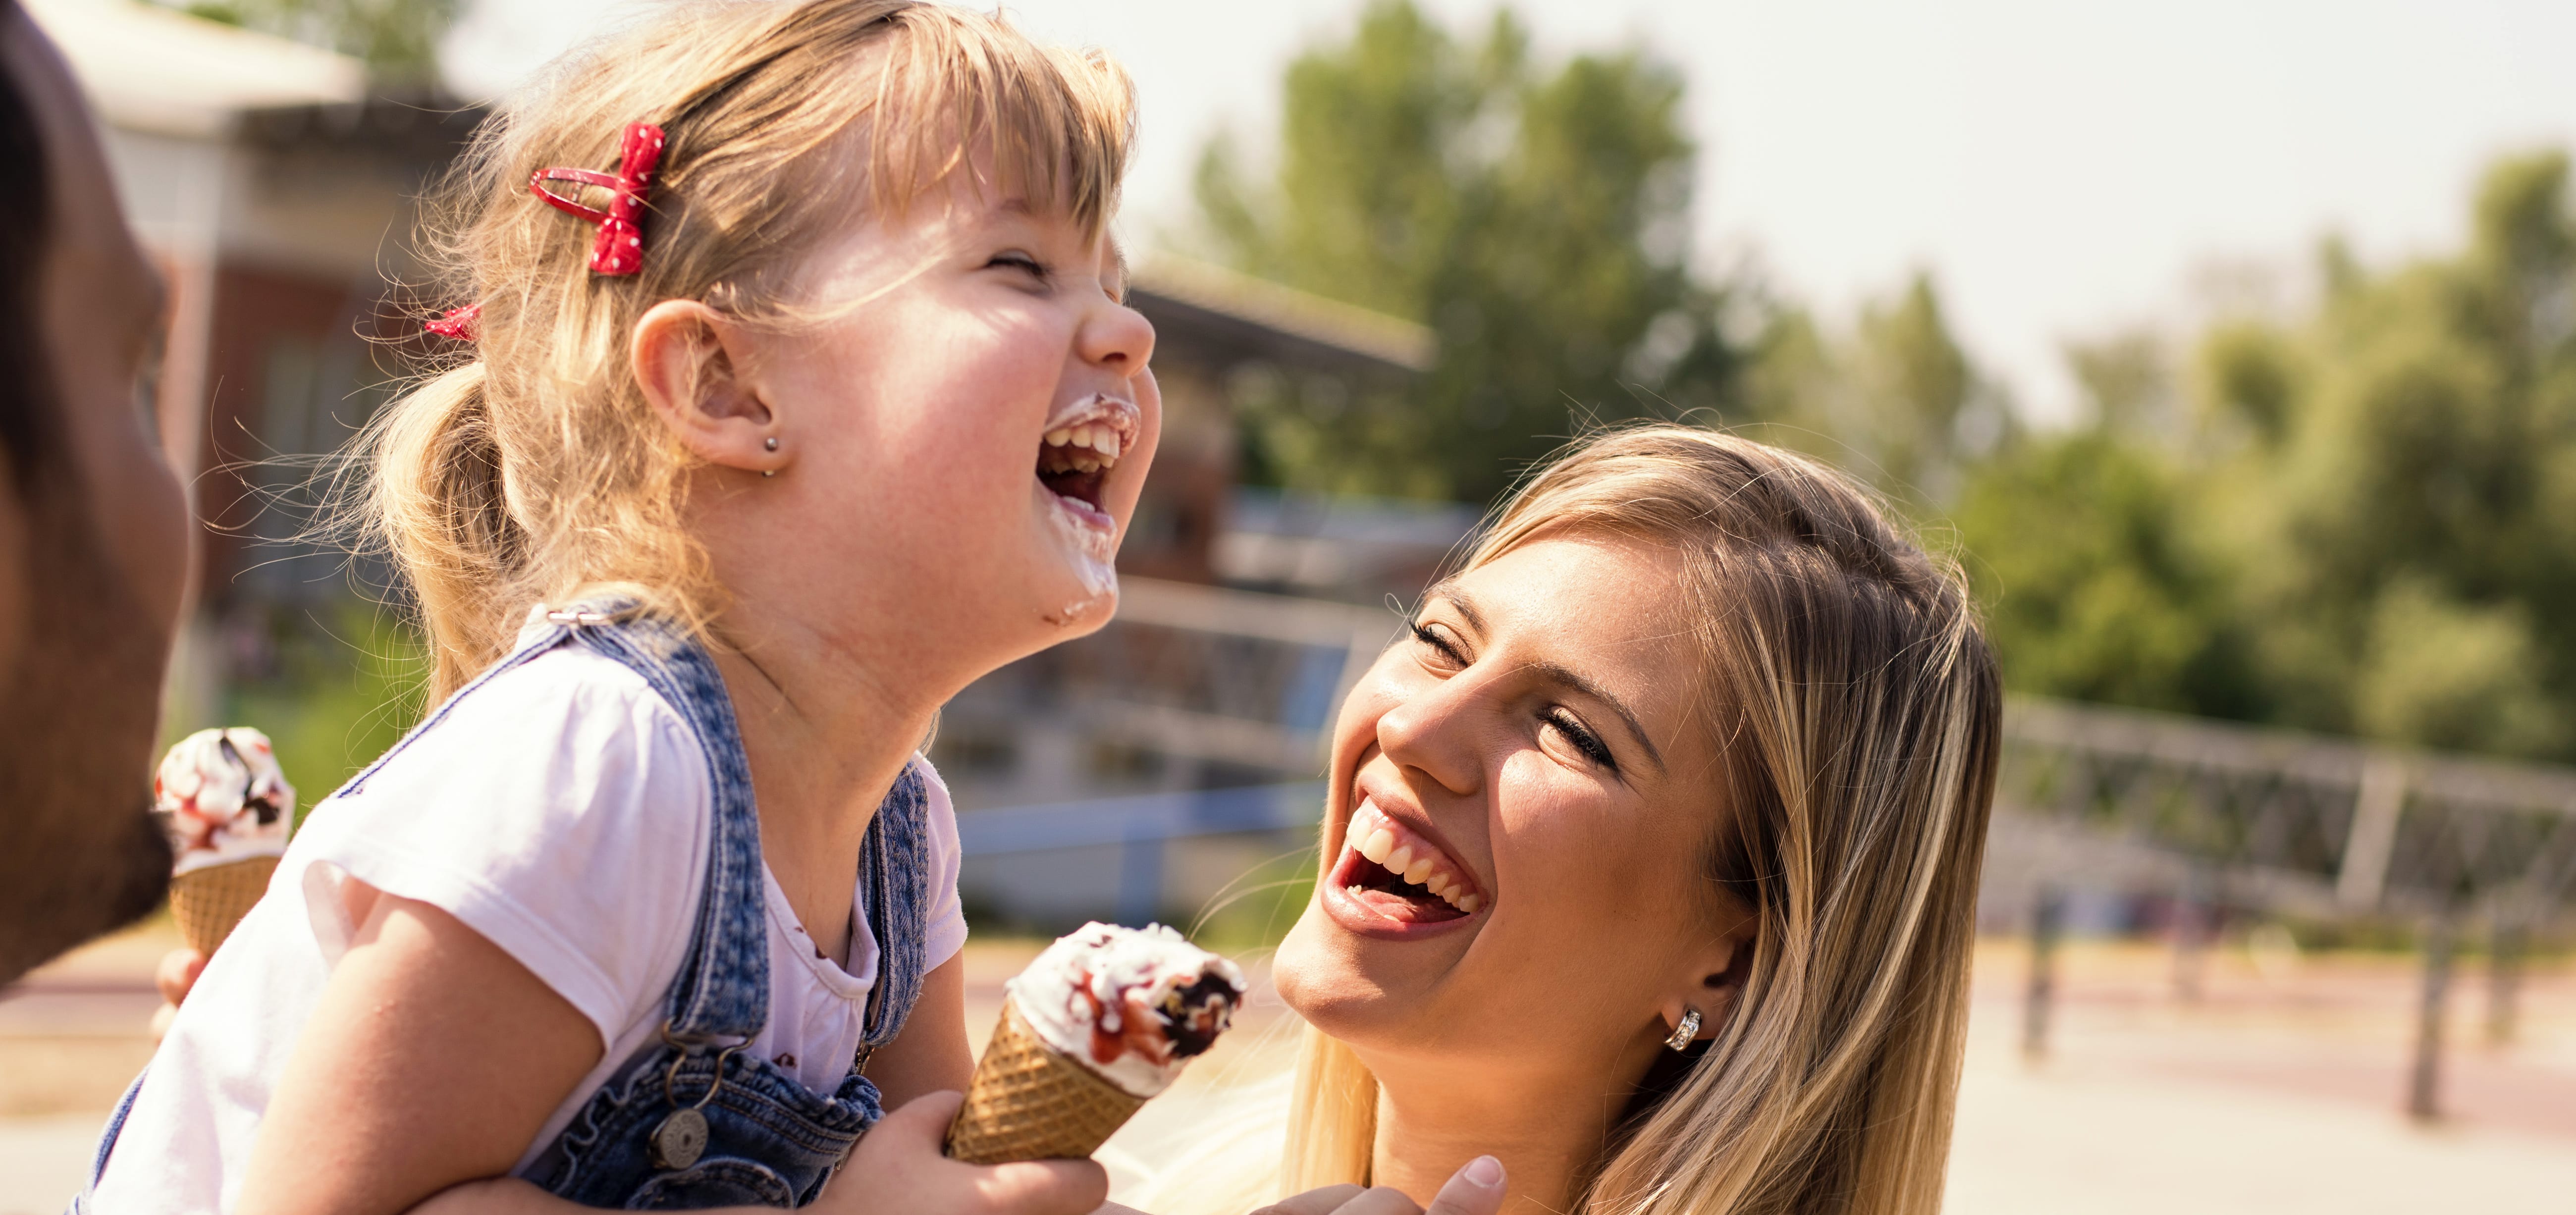 mother and daughter laughing over ice cream